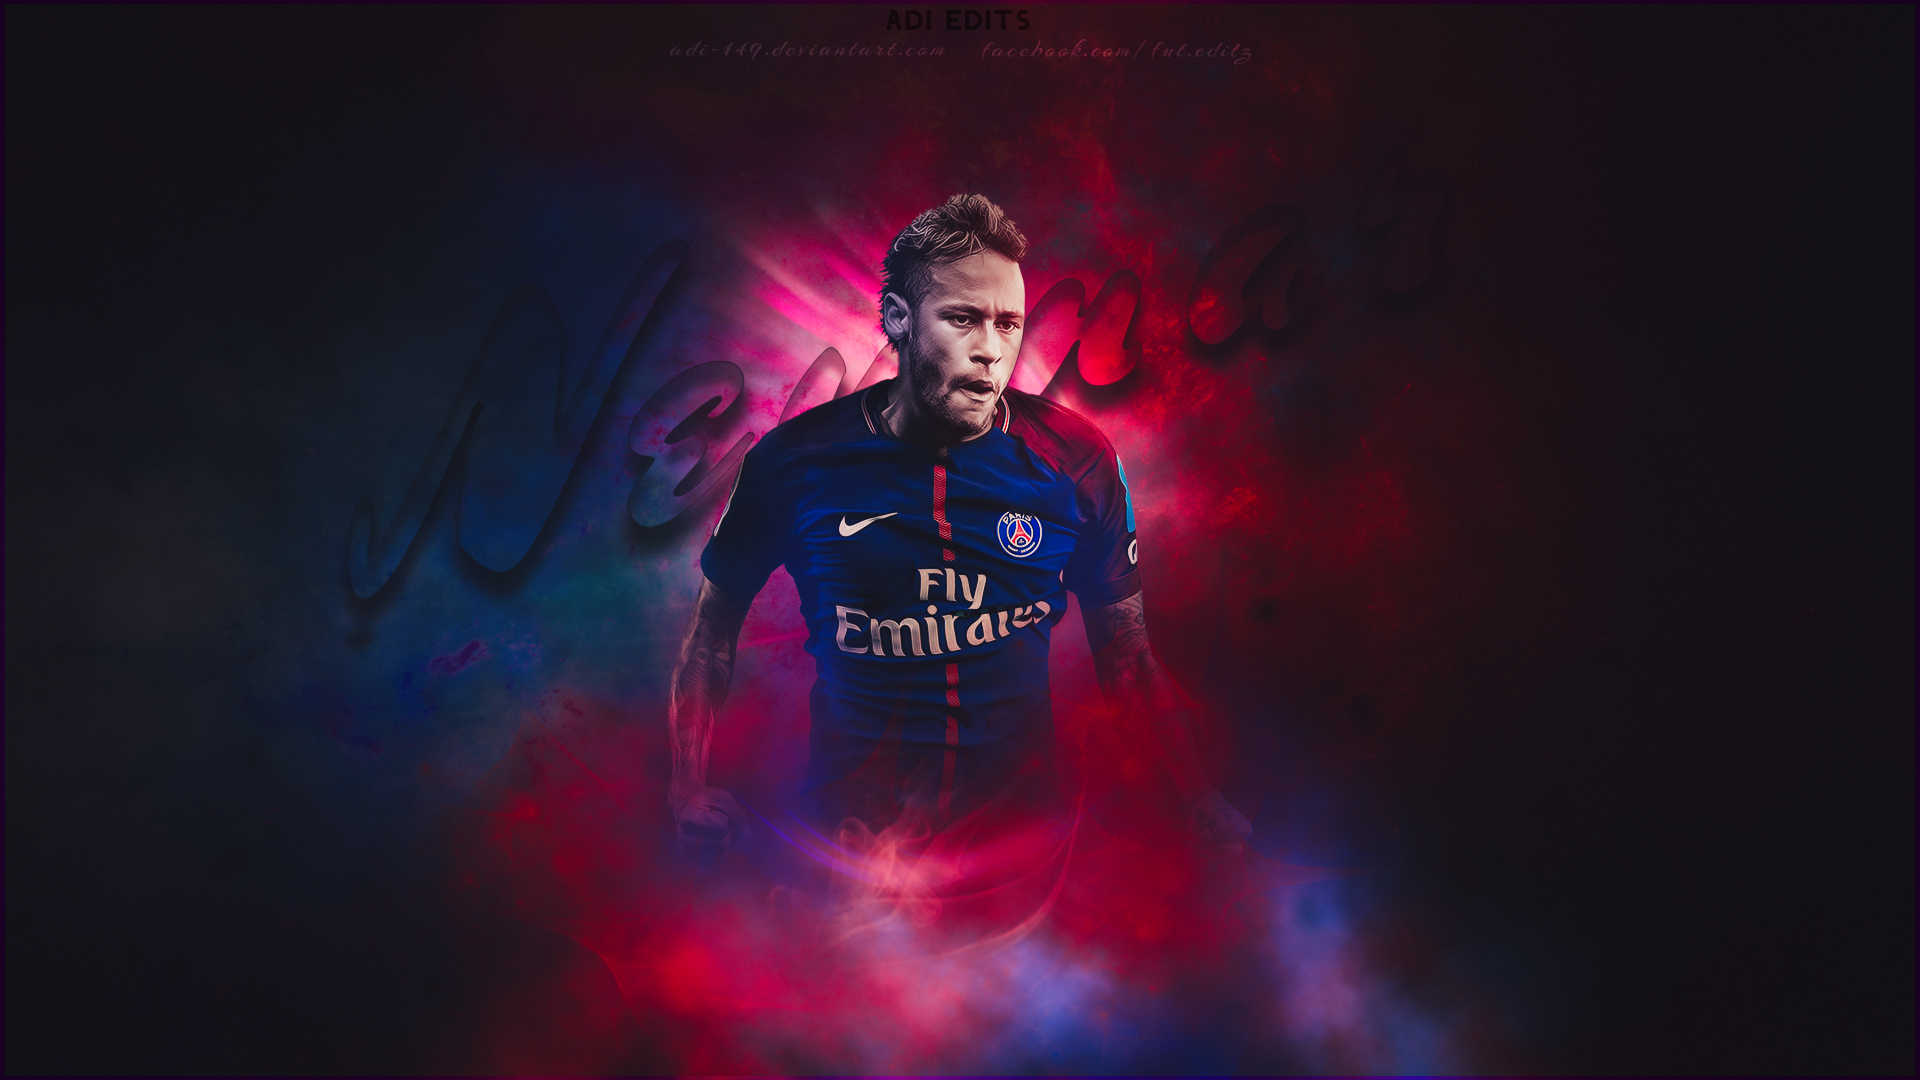 Neymar New 2021 Wallpaper, HD Sports 4K Wallpapers, Images, Photos and  Background - Wallpapers Den